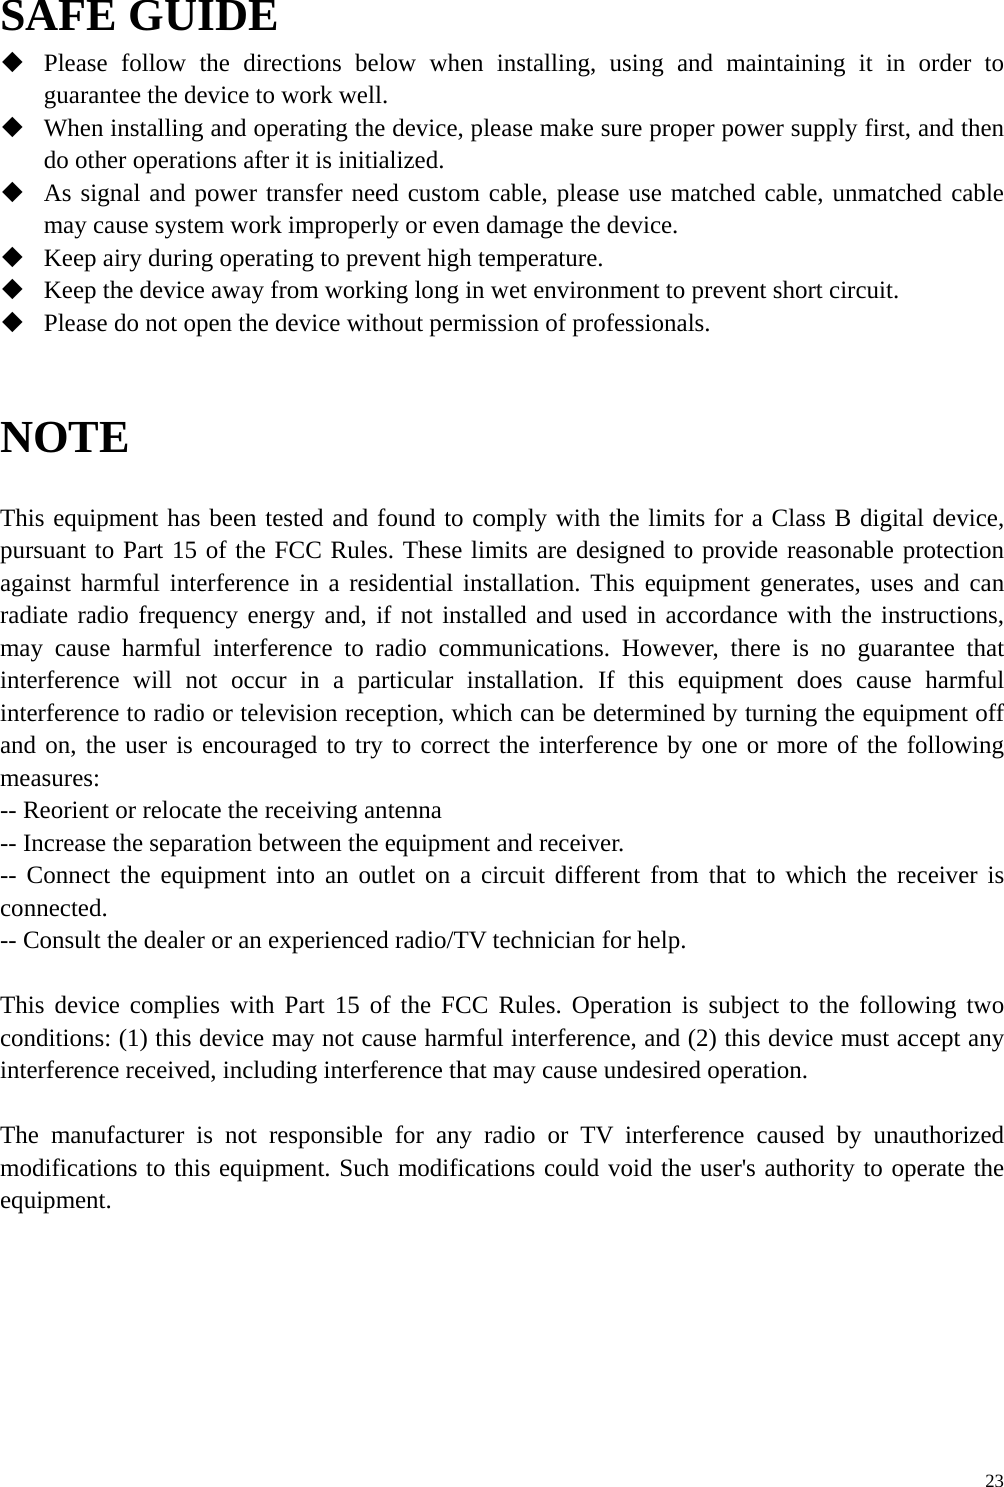      23SAFE GUIDE  Please follow the directions below when installing, using and maintaining it in order to guarantee the device to work well.  When installing and operating the device, please make sure proper power supply first, and then do other operations after it is initialized.  As signal and power transfer need custom cable, please use matched cable, unmatched cable may cause system work improperly or even damage the device.  Keep airy during operating to prevent high temperature.  Keep the device away from working long in wet environment to prevent short circuit.  Please do not open the device without permission of professionals.   NOTE  This equipment has been tested and found to comply with the limits for a Class B digital device, pursuant to Part 15 of the FCC Rules. These limits are designed to provide reasonable protection against harmful interference in a residential installation. This equipment generates, uses and can radiate radio frequency energy and, if not installed and used in accordance with the instructions, may cause harmful interference to radio communications. However, there is no guarantee that interference will not occur in a particular installation. If this equipment does cause harmful interference to radio or television reception, which can be determined by turning the equipment off and on, the user is encouraged to try to correct the interference by one or more of the following measures: -- Reorient or relocate the receiving antenna -- Increase the separation between the equipment and receiver. -- Connect the equipment into an outlet on a circuit different from that to which the receiver is connected. -- Consult the dealer or an experienced radio/TV technician for help.  This device complies with Part 15 of the FCC Rules. Operation is subject to the following two conditions: (1) this device may not cause harmful interference, and (2) this device must accept any interference received, including interference that may cause undesired operation.    The manufacturer is not responsible for any radio or TV interference caused by unauthorized modifications to this equipment. Such modifications could void the user&apos;s authority to operate the equipment.   